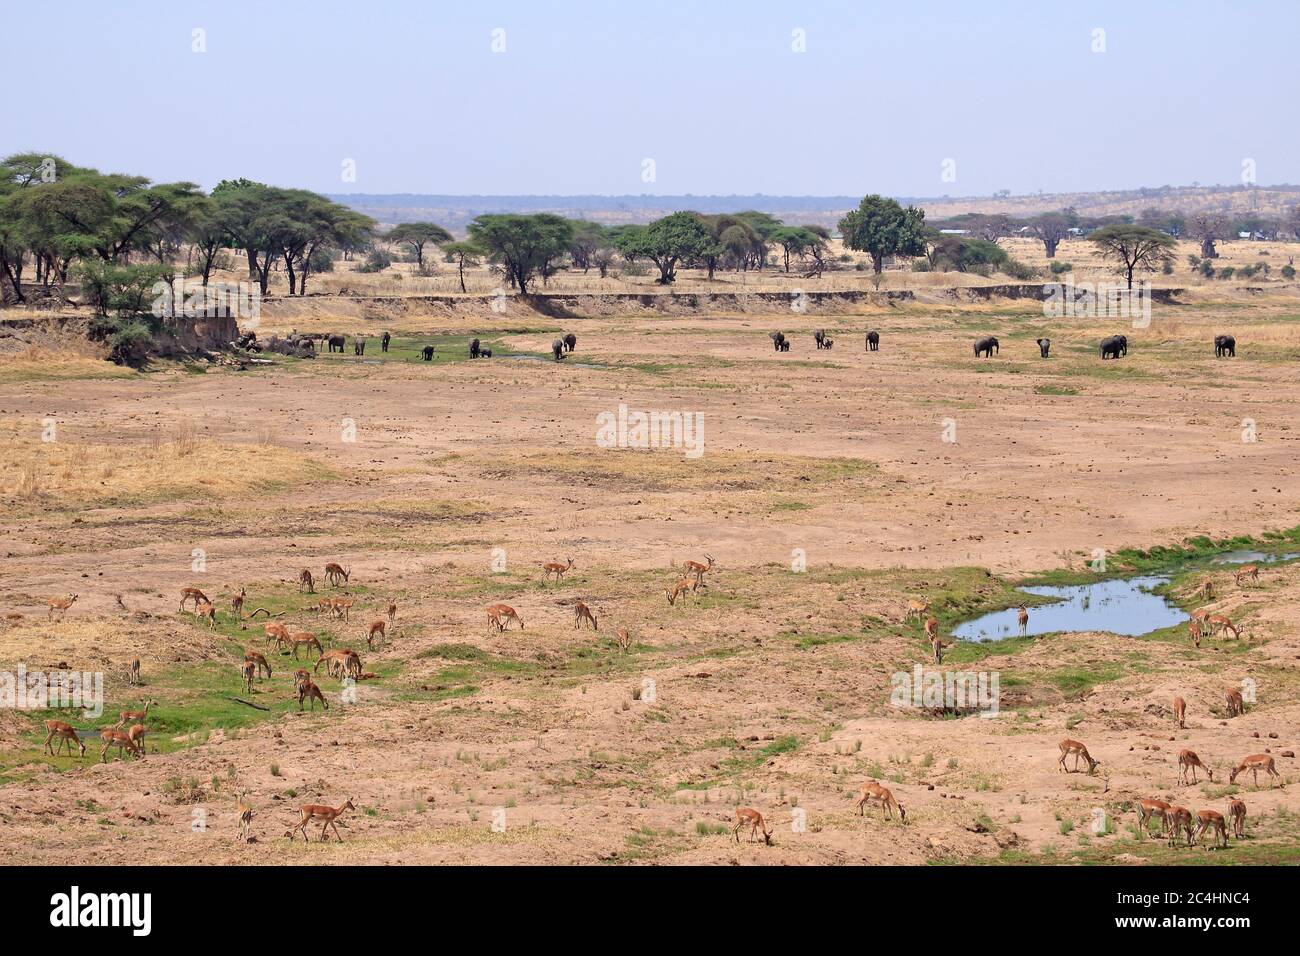 Elephants and Impala grazing in a dried up riverbed Stock Photo